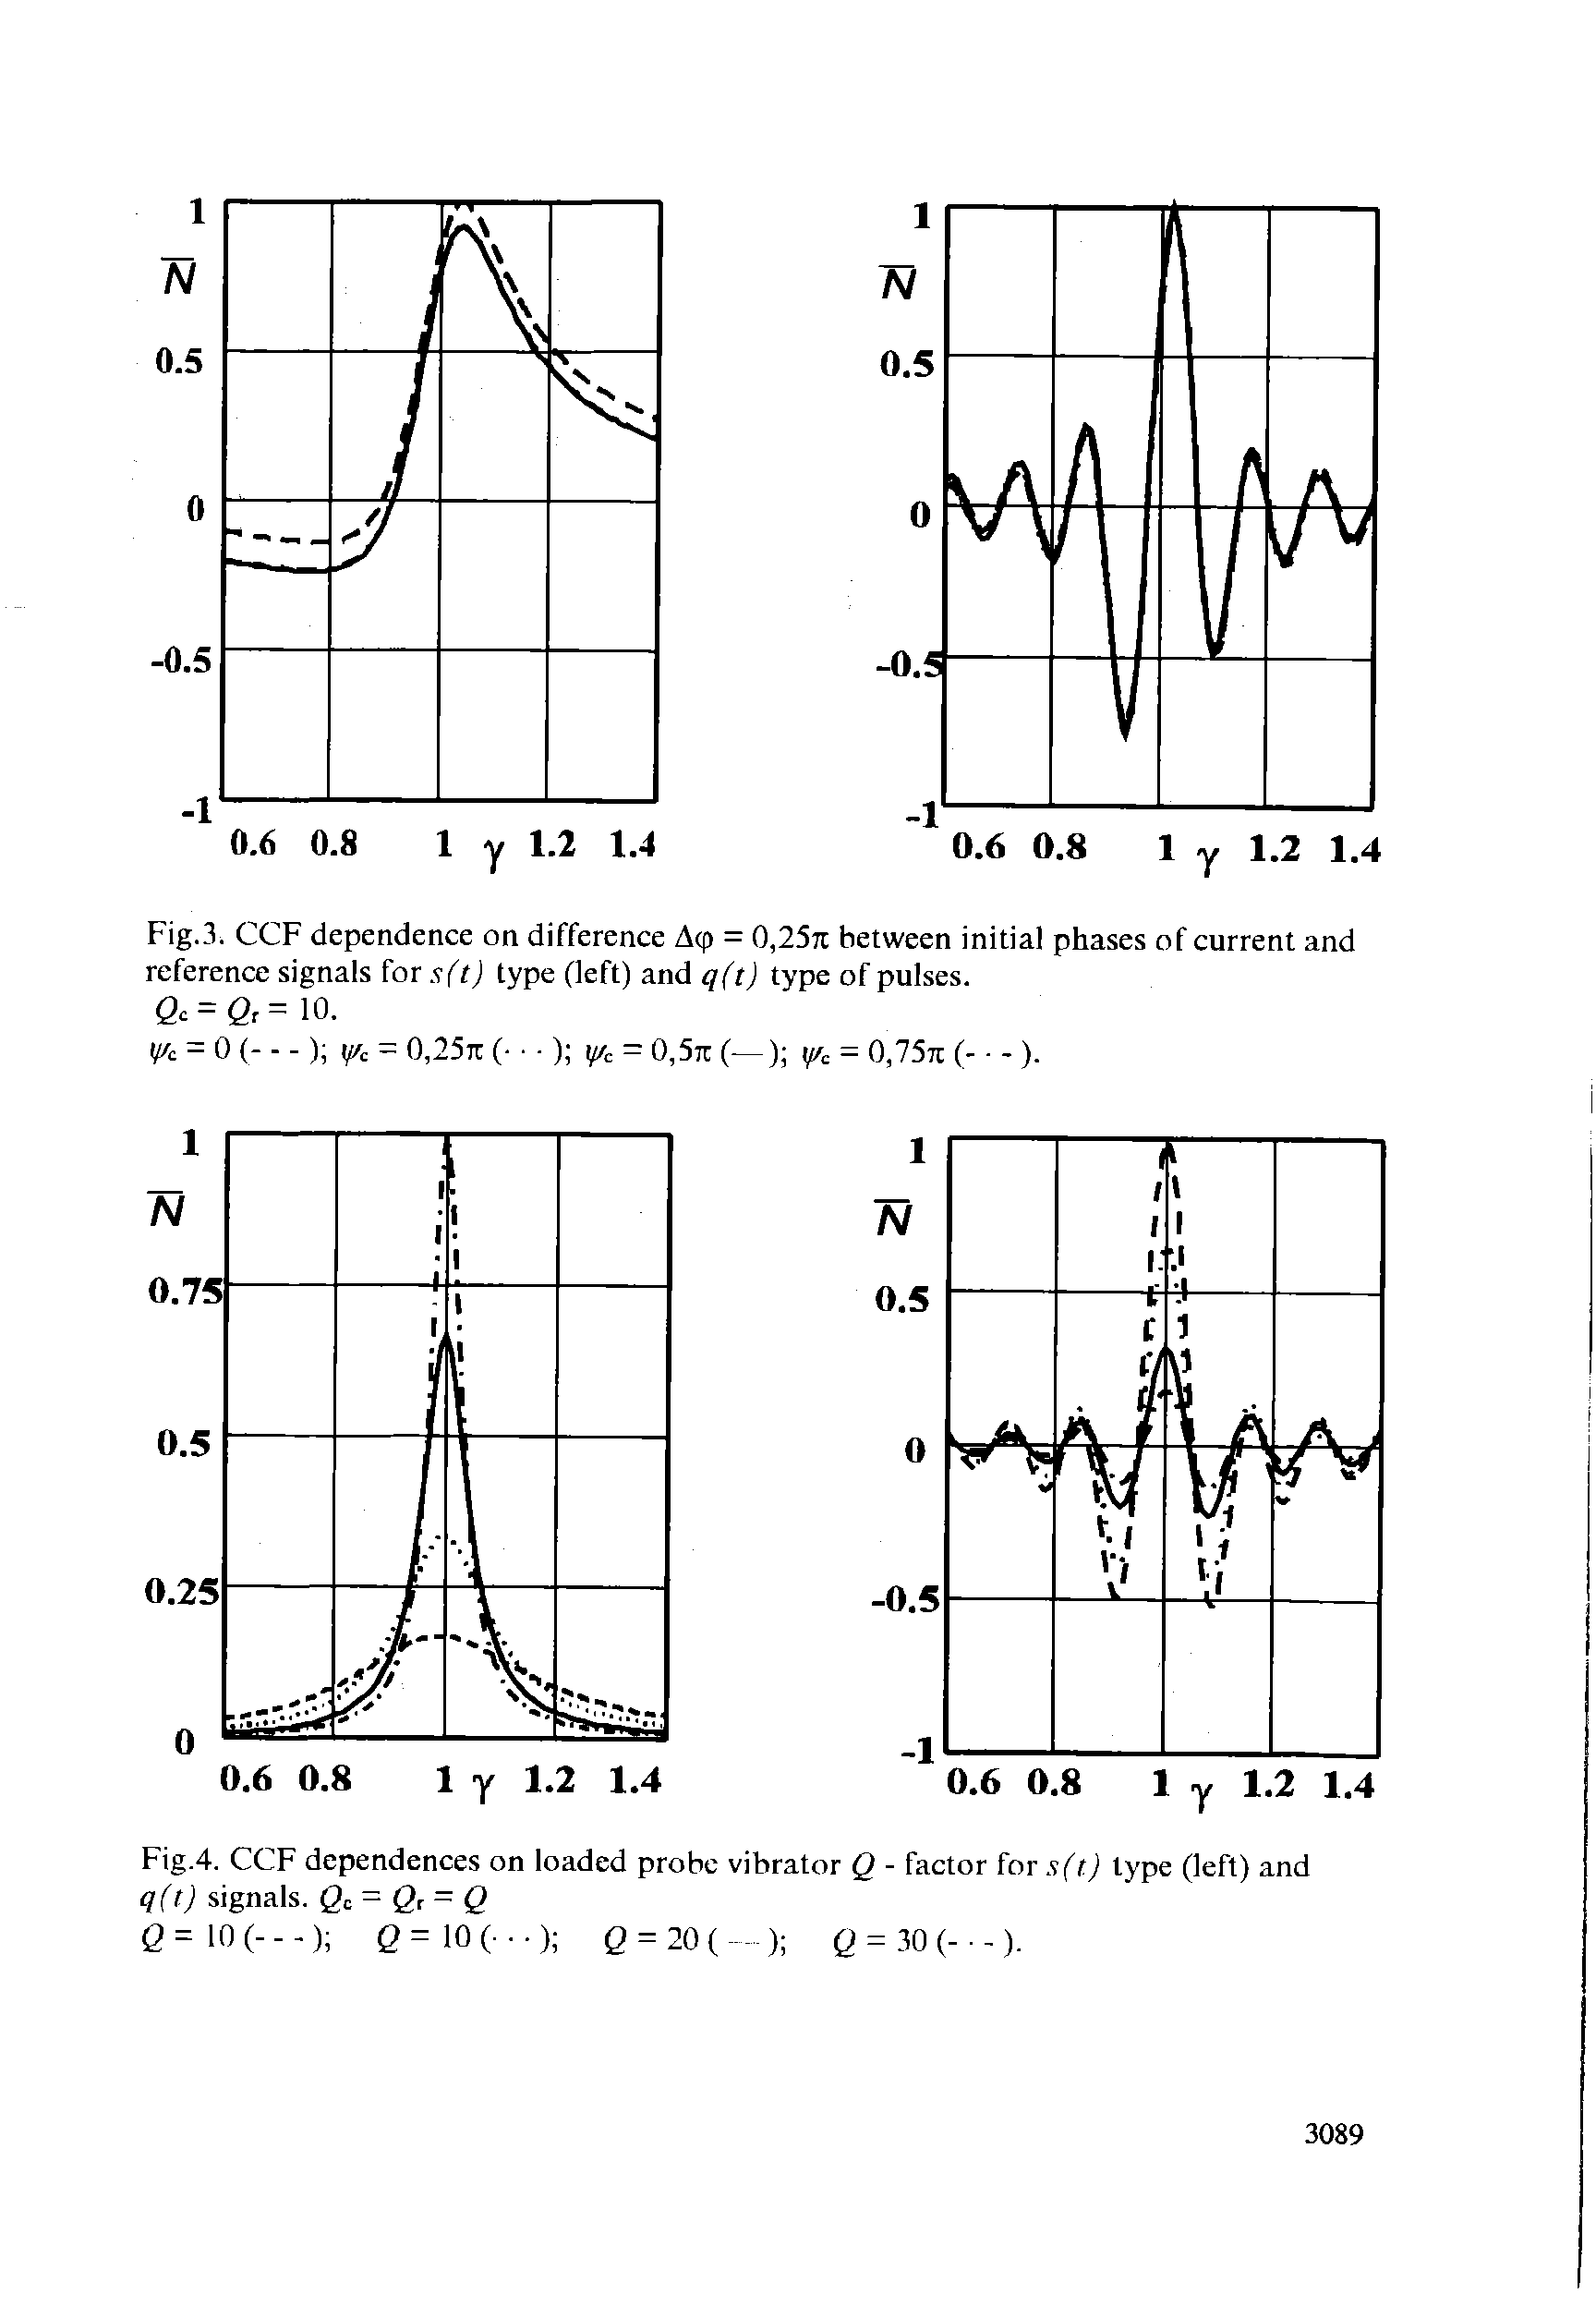 Fig.3. CCF dependence on difference A(p = 0,25rc between initial phases of current and reference signals for s(t) type (left) and q(t) type of pulses.